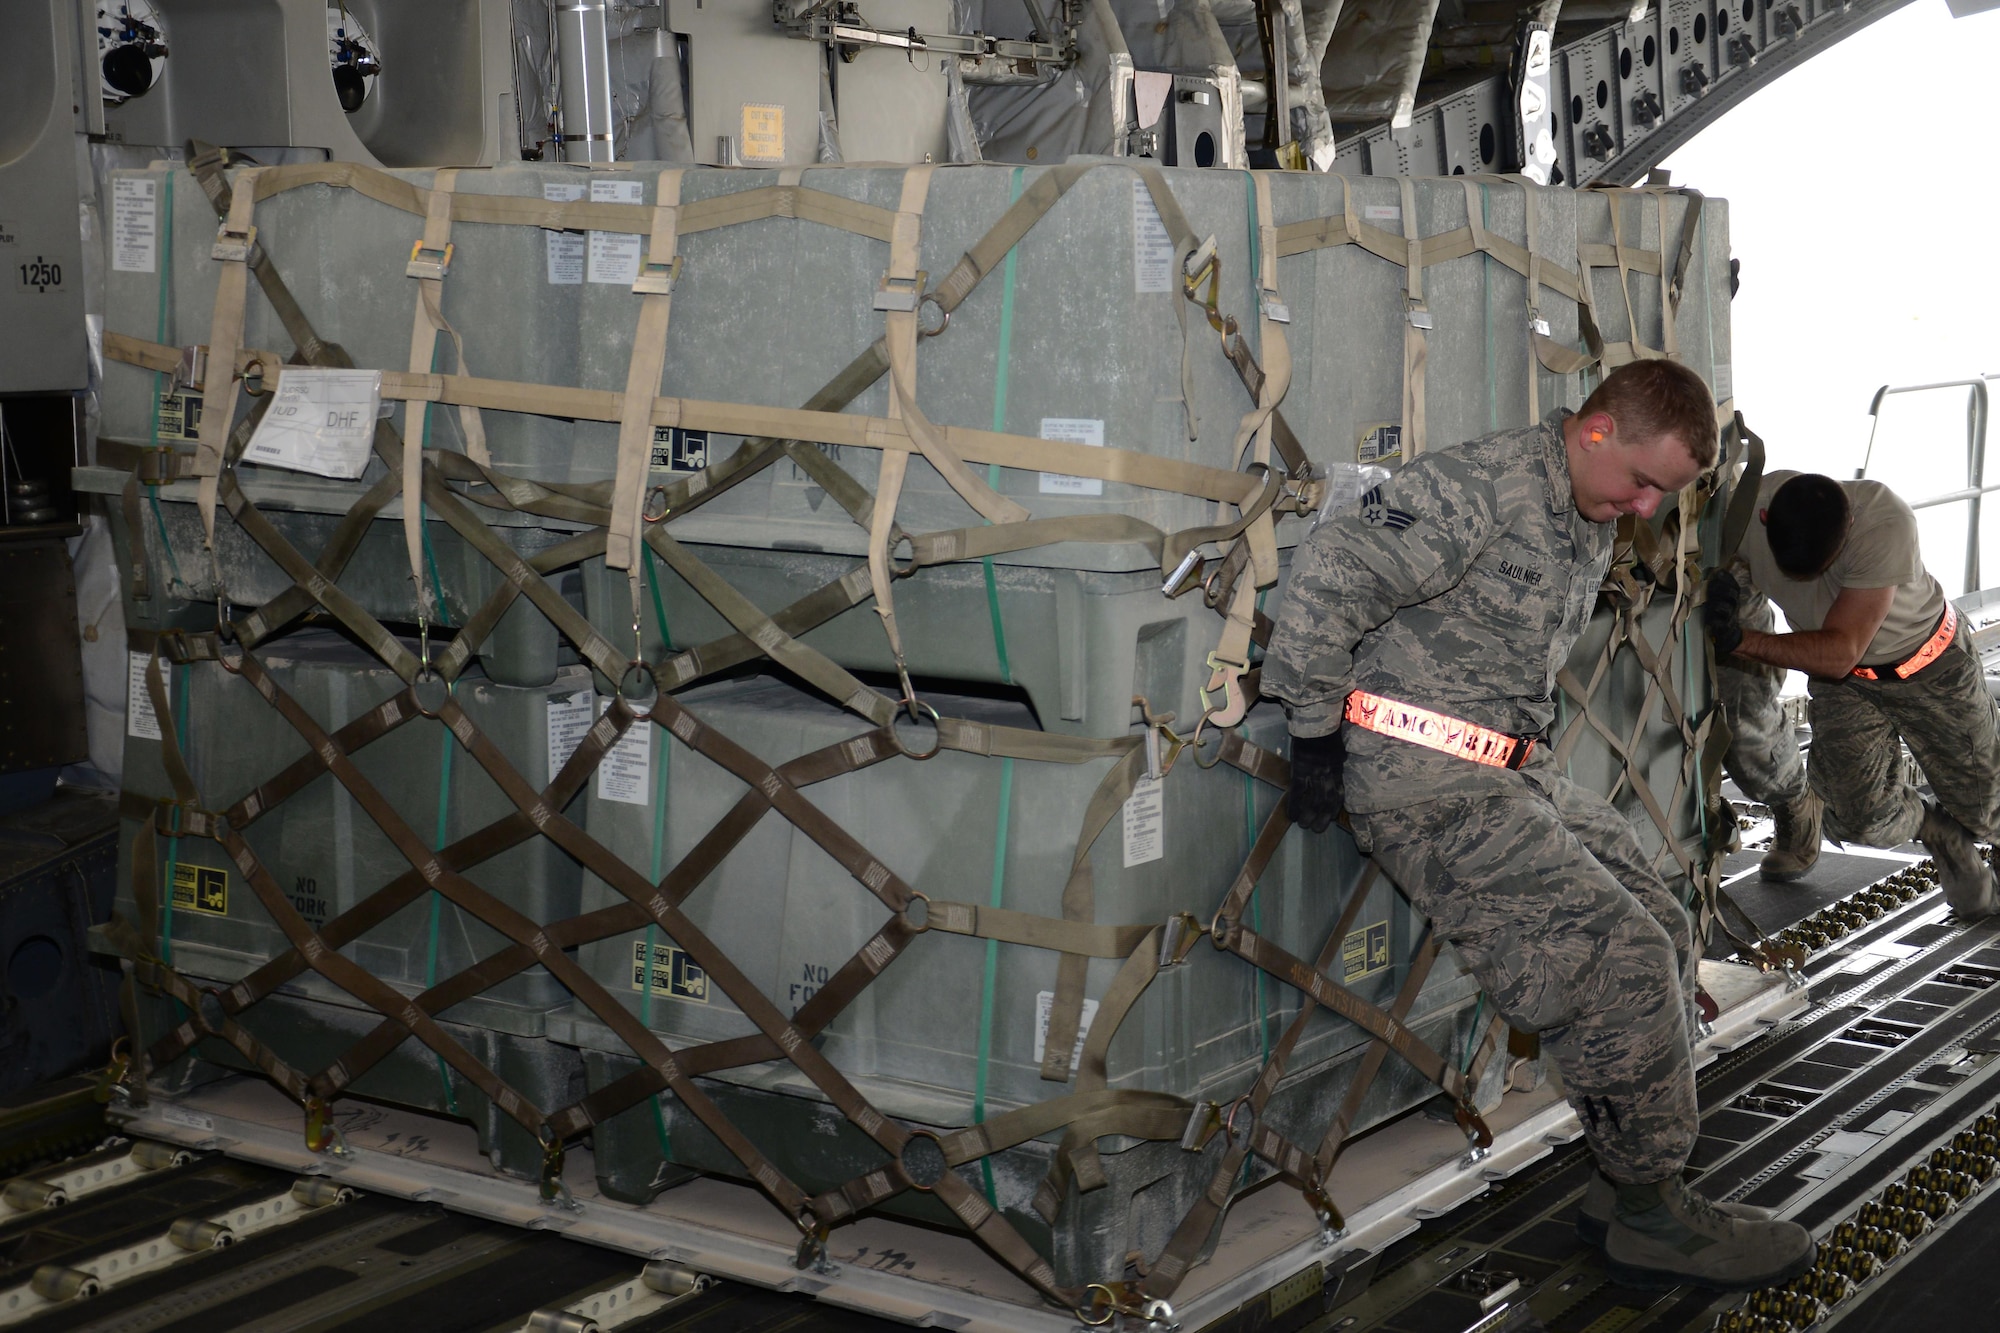 Airmen from the 8th Expeditionary Air Mobility Squadron Ramp Services team load munitions onto a C-17 Globemaster III from Travis Air Force Base, Calif., at Al Udeid Air Base, Qatar Feb. 26 in support of Operation Inherent Resolve. In February the team loaded more than 3,500 tons of cargo onto U.S. aircraft. (U.S. Air Force photo by Tech. Sgt. James Hodgman/Released) 